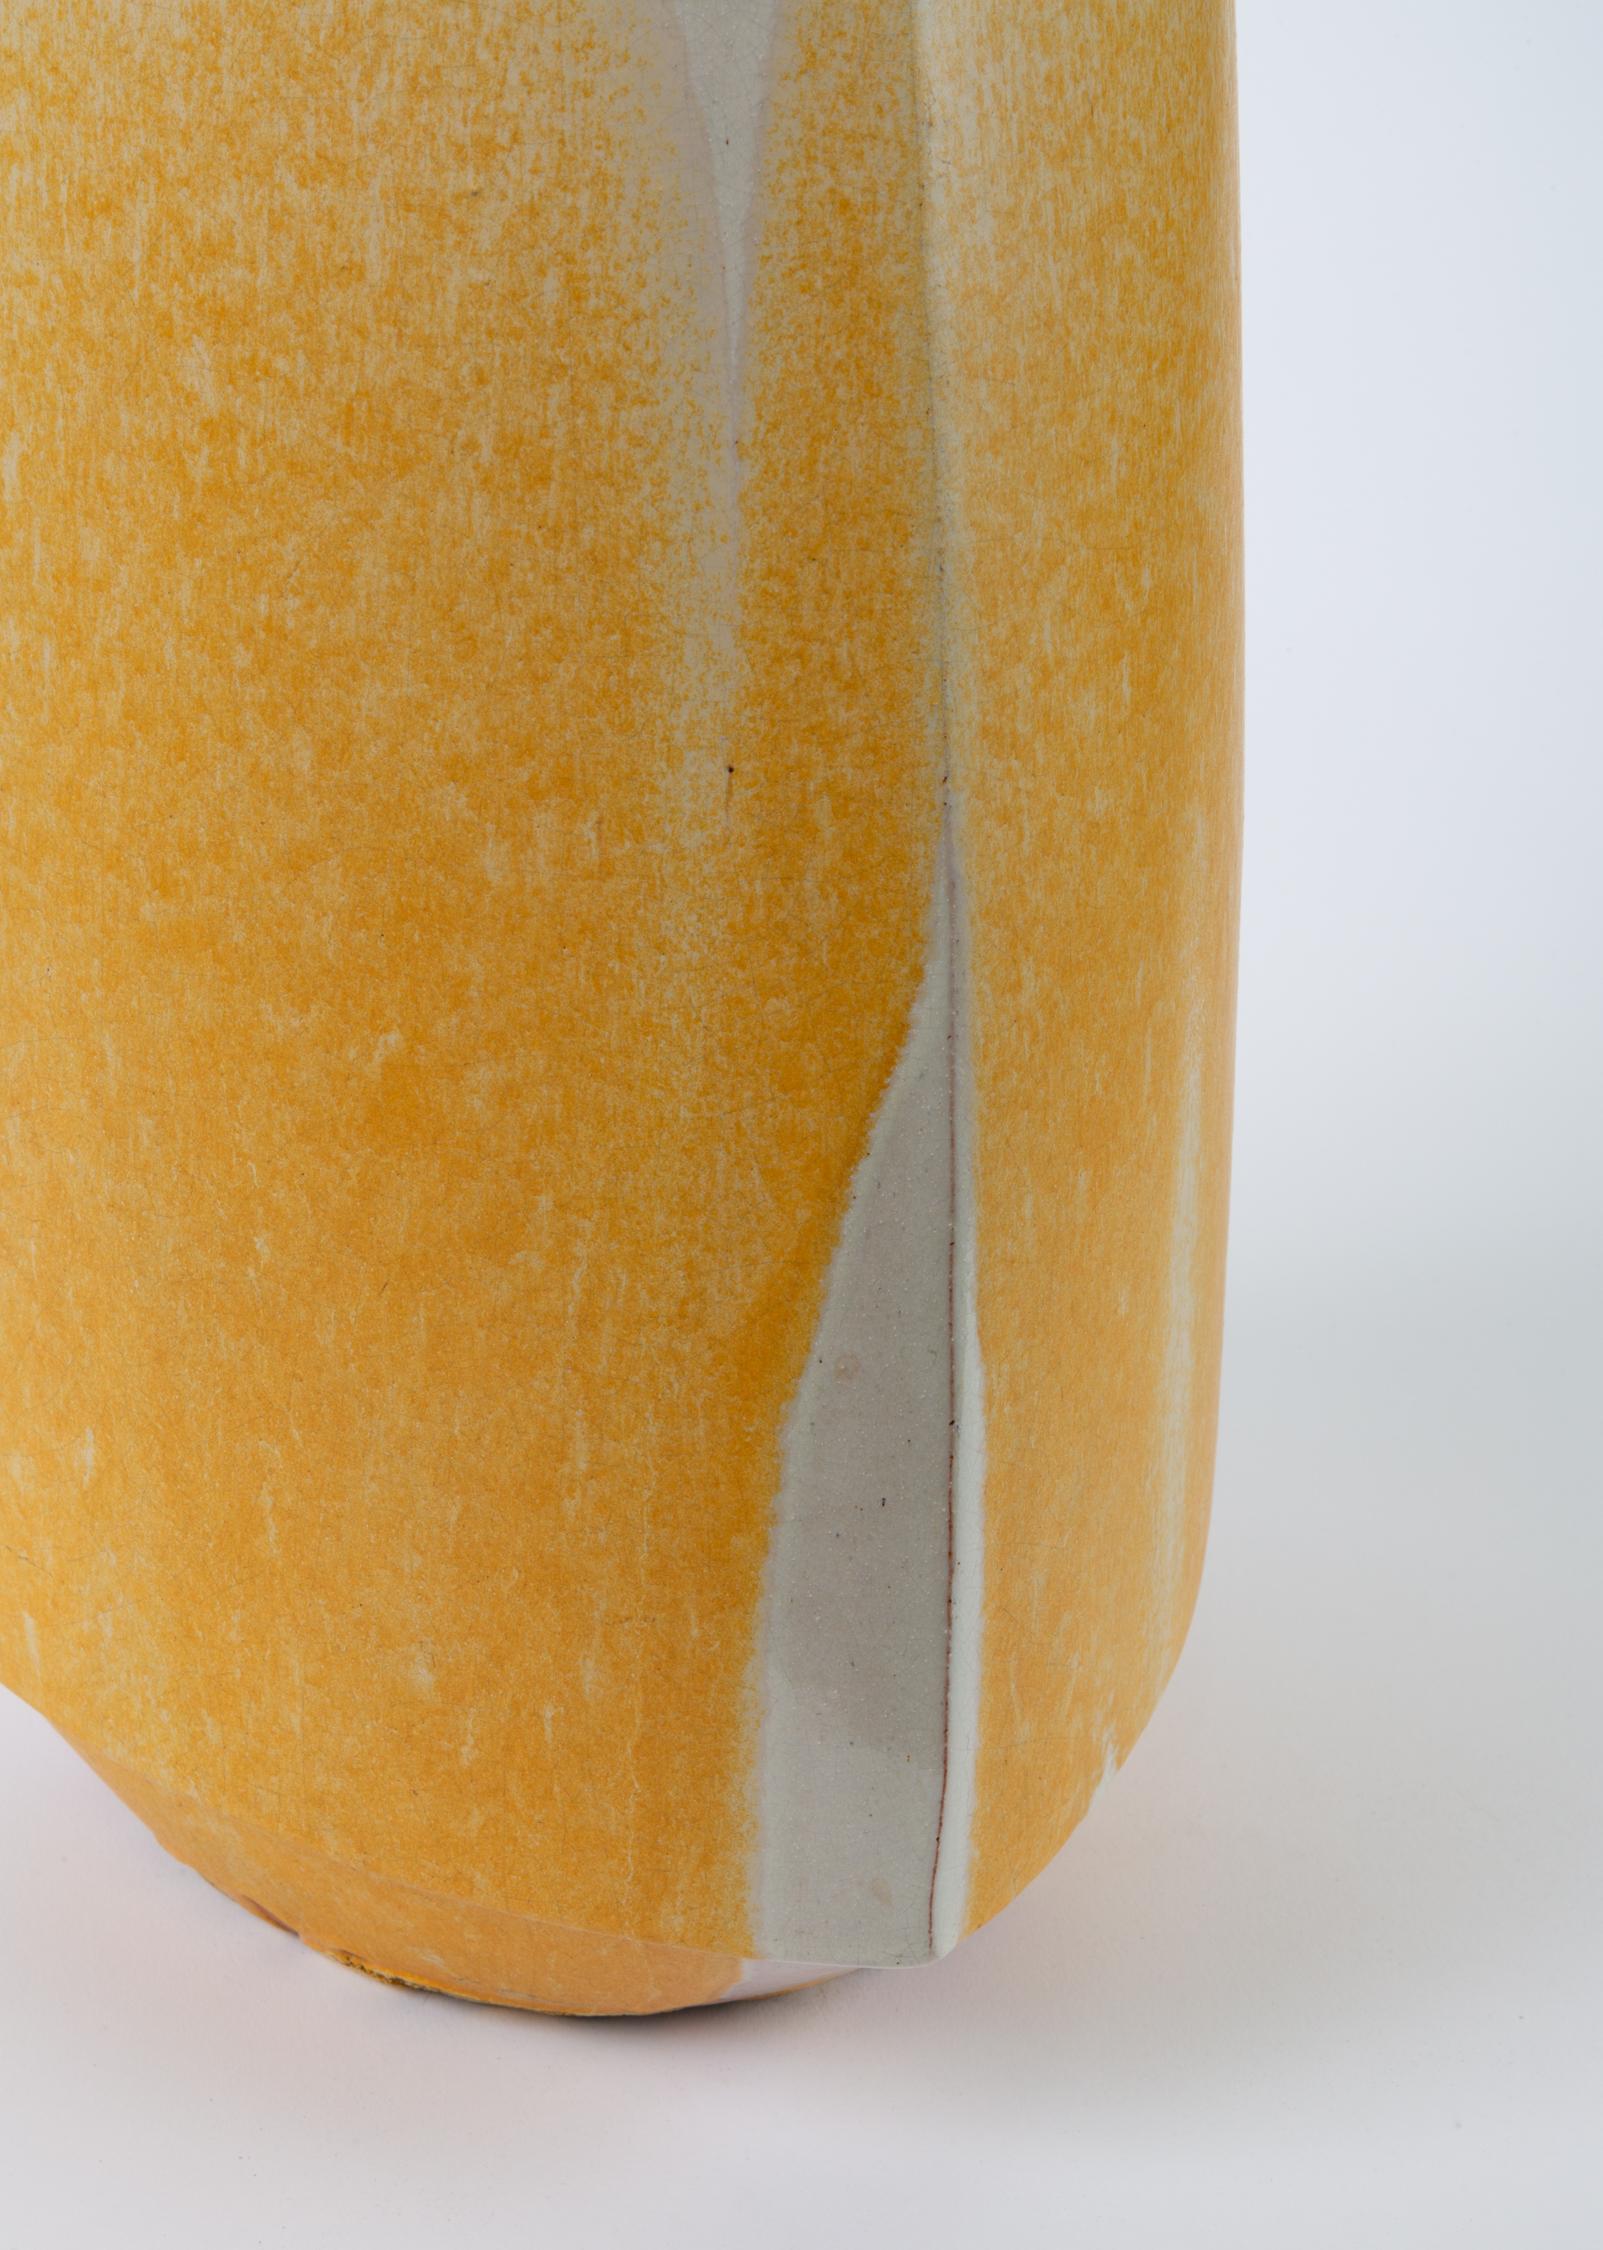 Glazed Drip-Glaze Stoneware Lamp by David Cressey for Architectural Pottery